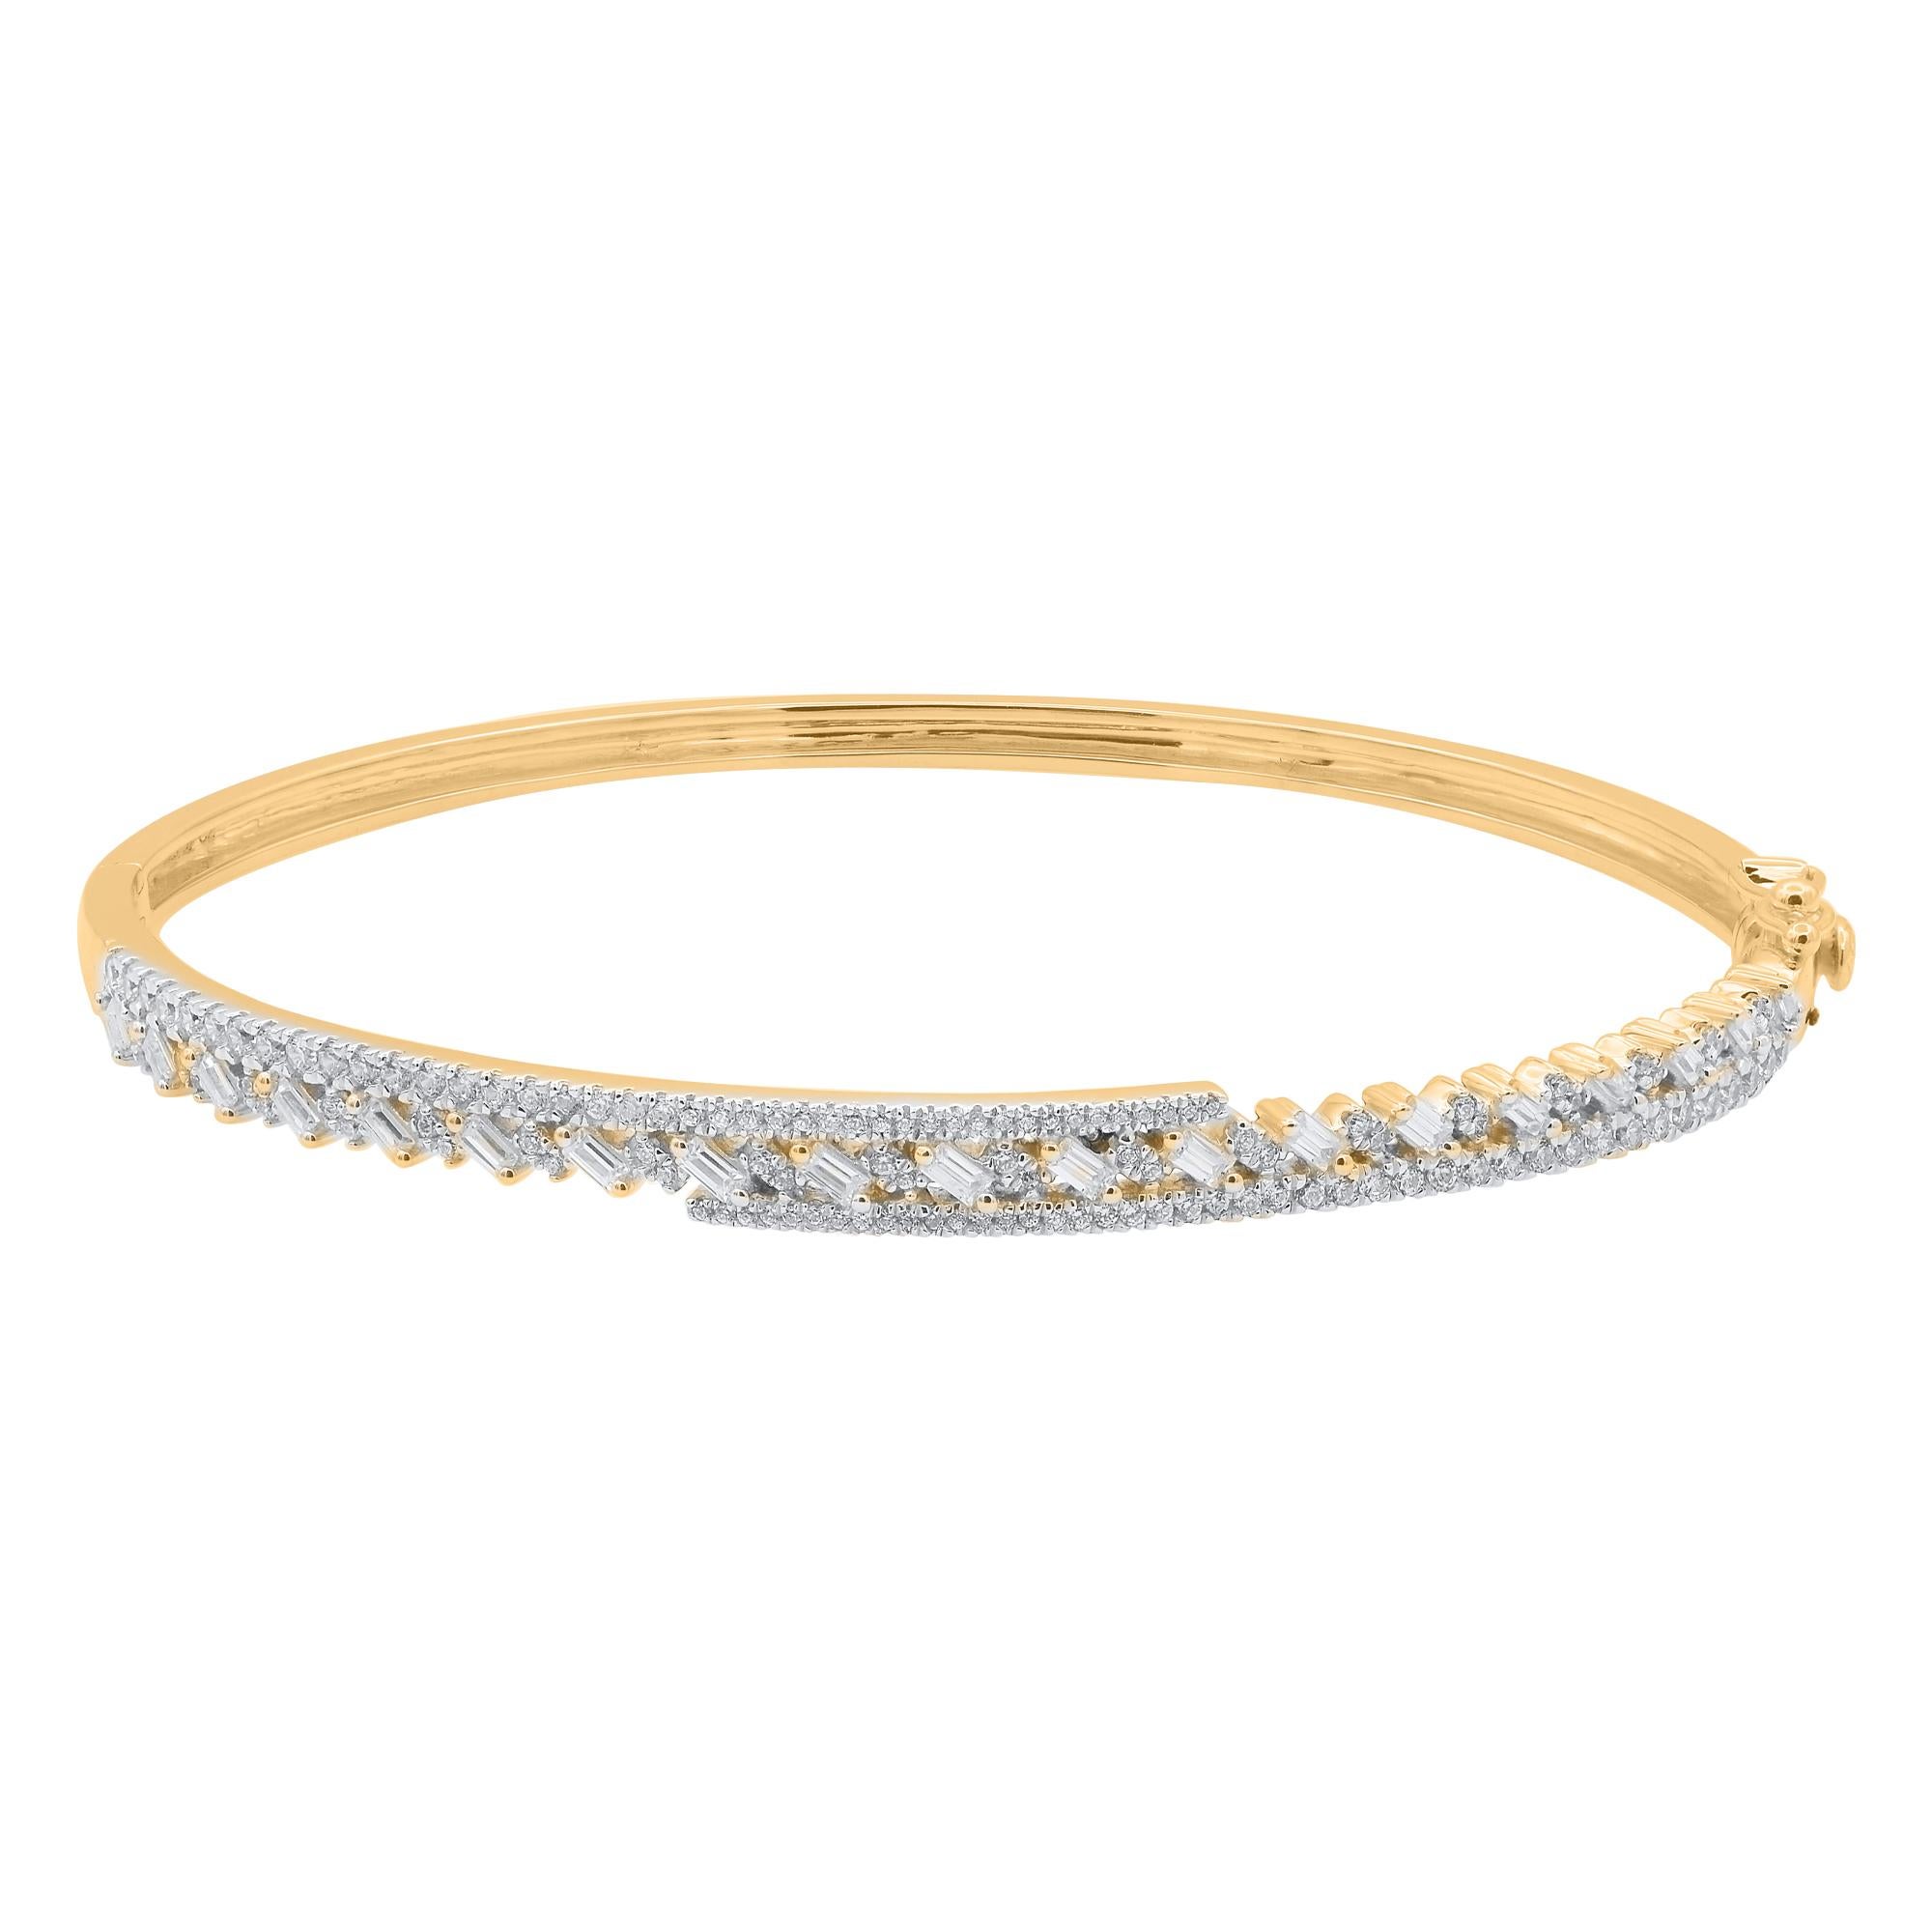 TJD 1.0 Ct Natural Round & Baguette Diamond Bangle Bracelet in 18KT Yellow Gold For Sale